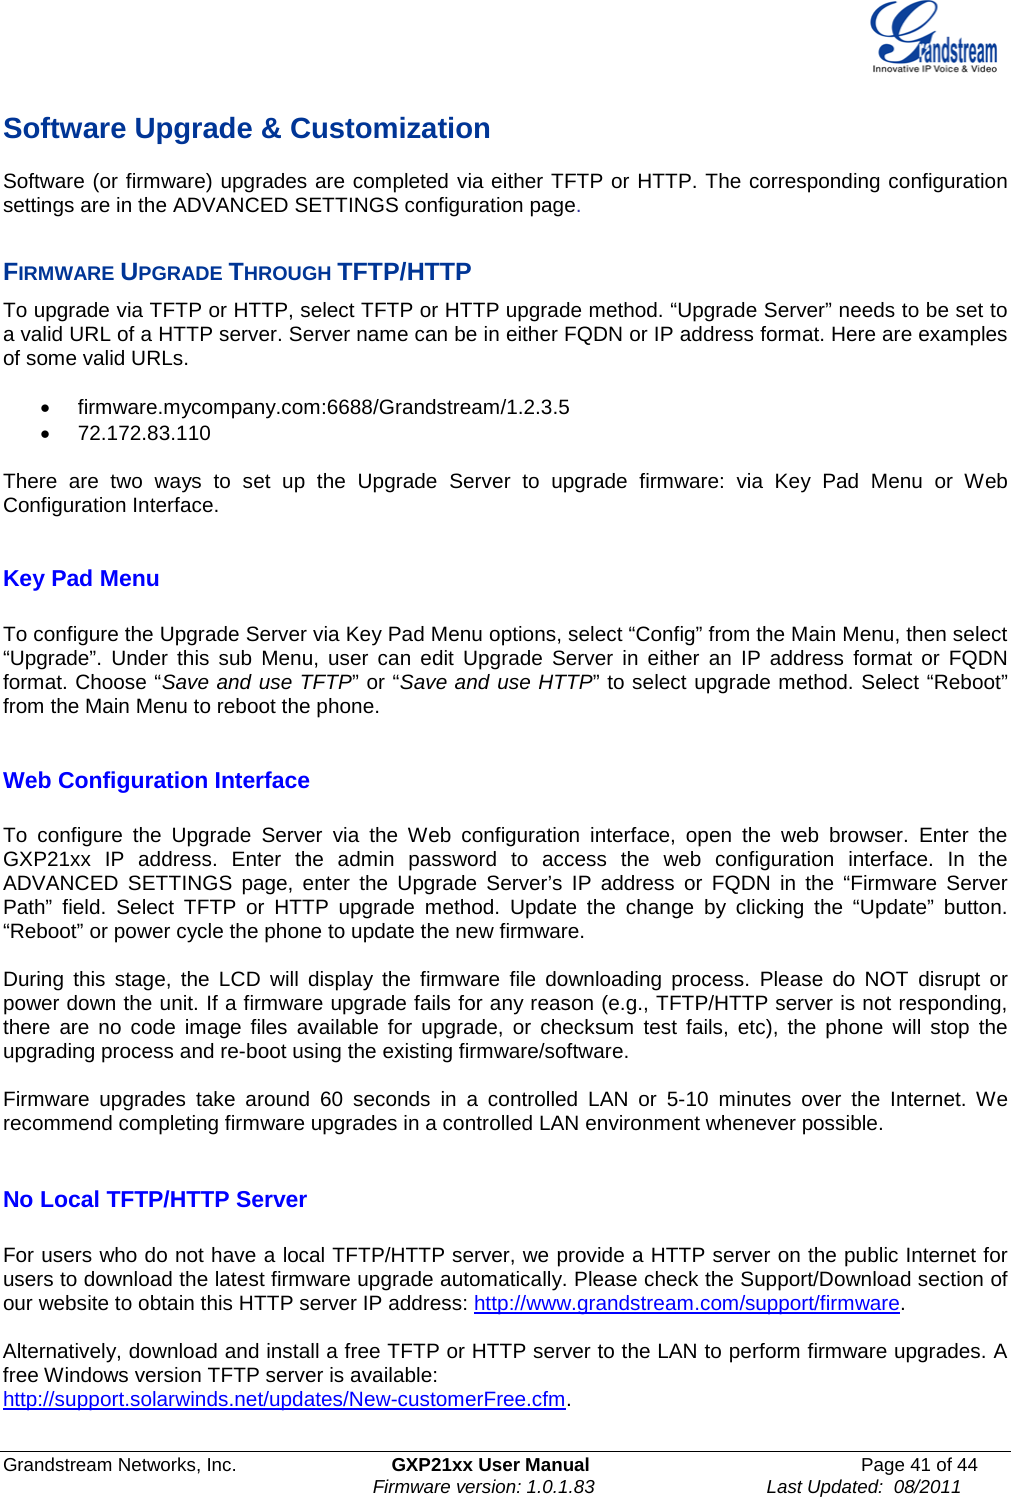  Grandstream Networks, Inc. GXP21xx User Manual Page 41 of 44                                                               Firmware version: 1.0.1.83                                 Last Updated:  08/2011  Software Upgrade &amp; Customization Software (or firmware) upgrades are completed via either TFTP or HTTP. The corresponding configuration settings are in the ADVANCED SETTINGS configuration page.   FIRMWARE UPGRADE THROUGH TFTP/HTTP To upgrade via TFTP or HTTP, select TFTP or HTTP upgrade method. “Upgrade Server” needs to be set to a valid URL of a HTTP server. Server name can be in either FQDN or IP address format. Here are examples of some valid URLs.   • firmware.mycompany.com:6688/Grandstream/1.2.3.5 • 72.172.83.110    There are two ways to set up the Upgrade Server to upgrade firmware: via Key Pad Menu or Web Configuration Interface.  Key Pad Menu        To configure the Upgrade Server via Key Pad Menu options, select “Config” from the Main Menu, then select “Upgrade”. Under this sub Menu, user can edit Upgrade Server in either an IP address format or FQDN format. Choose “Save and use TFTP” or “Save and use HTTP” to select upgrade method. Select “Reboot” from the Main Menu to reboot the phone.  Web Configuration Interface  To configure the Upgrade Server via the Web configuration interface, open the web browser. Enter the GXP21xx IP address. Enter the admin password to access the web configuration interface. In the ADVANCED SETTINGS page, enter the Upgrade Server’s IP address or FQDN in the “Firmware Server Path” field. Select TFTP or HTTP upgrade method. Update the change by clicking the “Update” button. “Reboot” or power cycle the phone to update the new firmware.  During this stage, the LCD will display the firmware file downloading process. Please do NOT disrupt or power down the unit. If a firmware upgrade fails for any reason (e.g., TFTP/HTTP server is not responding, there are no code image files available for upgrade, or checksum test fails, etc), the phone will stop the upgrading process and re-boot using the existing firmware/software.  Firmware upgrades take around 60 seconds in a controlled LAN or 5-10 minutes over the Internet. We recommend completing firmware upgrades in a controlled LAN environment whenever possible.   No Local TFTP/HTTP Server  For users who do not have a local TFTP/HTTP server, we provide a HTTP server on the public Internet for users to download the latest firmware upgrade automatically. Please check the Support/Download section of our website to obtain this HTTP server IP address: http://www.grandstream.com/support/firmware.  Alternatively, download and install a free TFTP or HTTP server to the LAN to perform firmware upgrades. A free Windows version TFTP server is available:   http://support.solarwinds.net/updates/New-customerFree.cfm.  